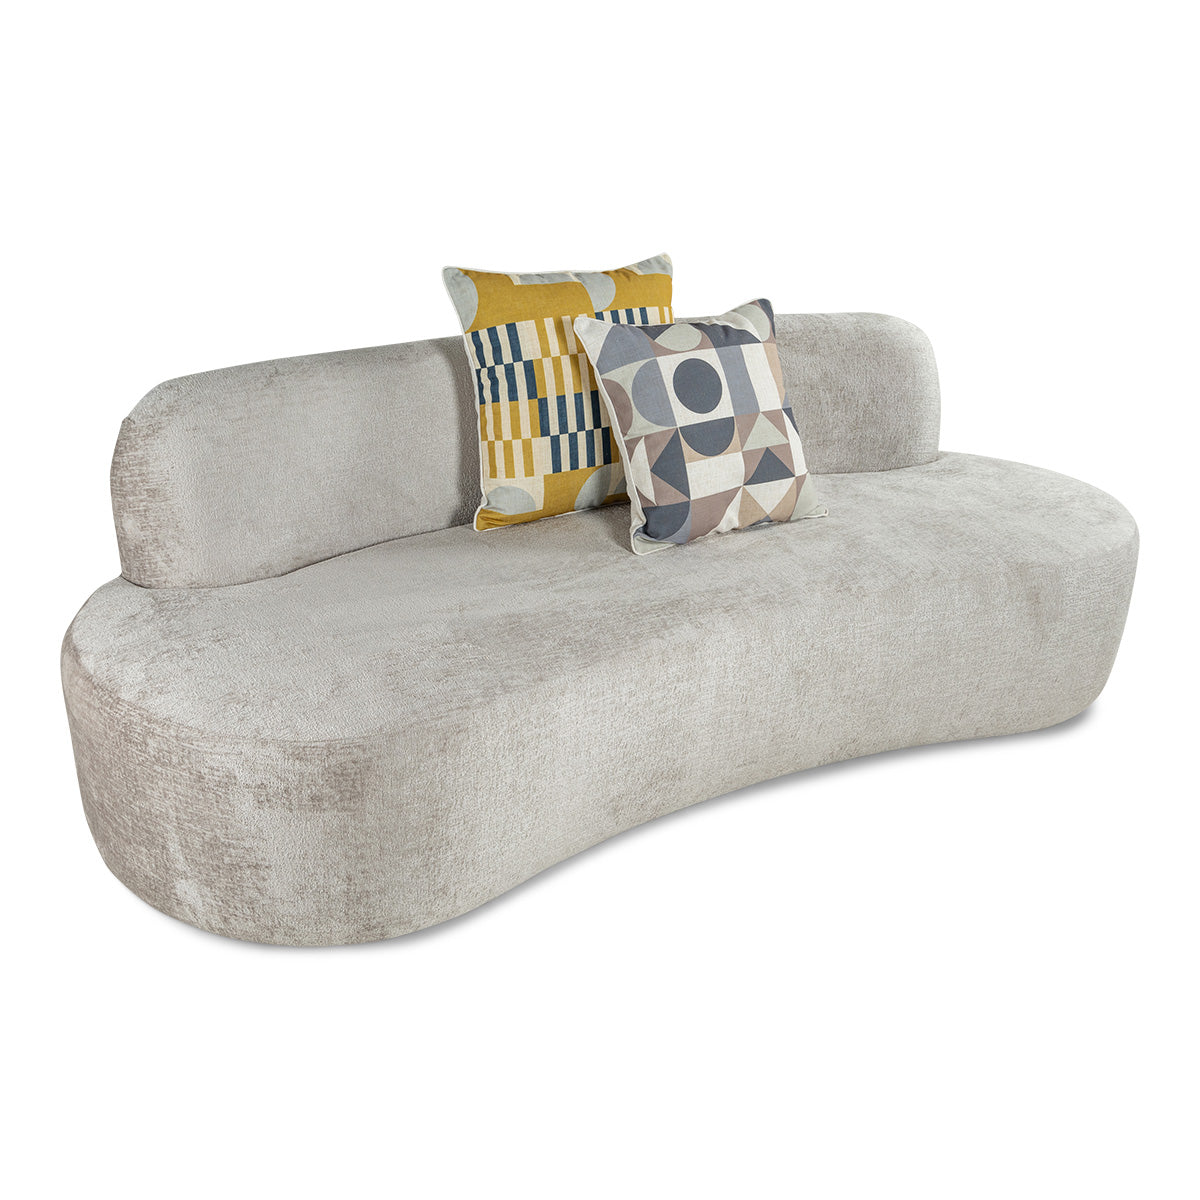 Sag Harbor Sofa in Poodle Taupe